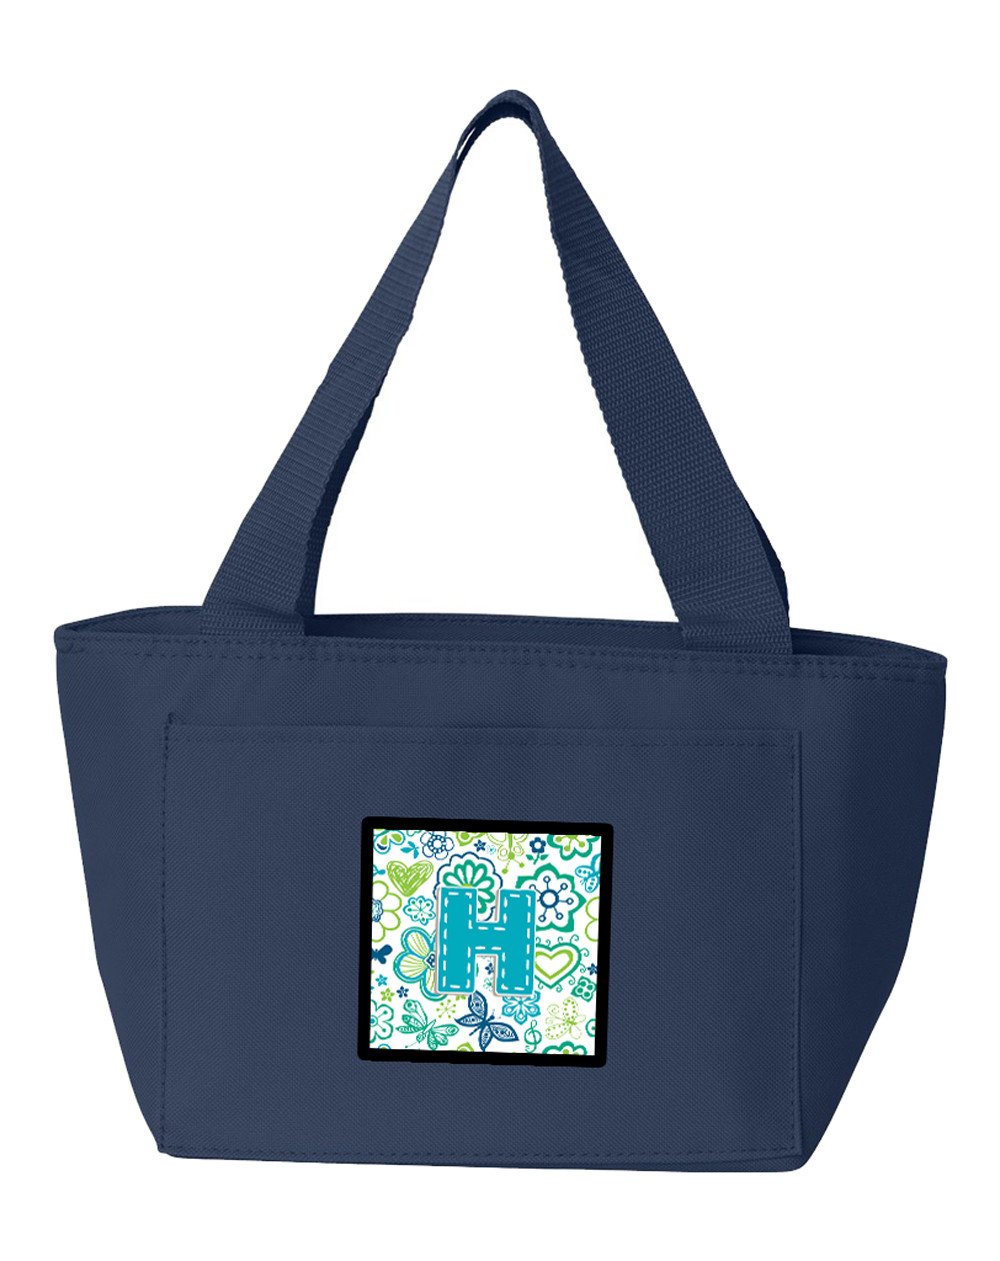 Letter H Flowers and Butterflies Teal Blue Lunch Bag CJ2006-HNA-8808 by Caroline's Treasures